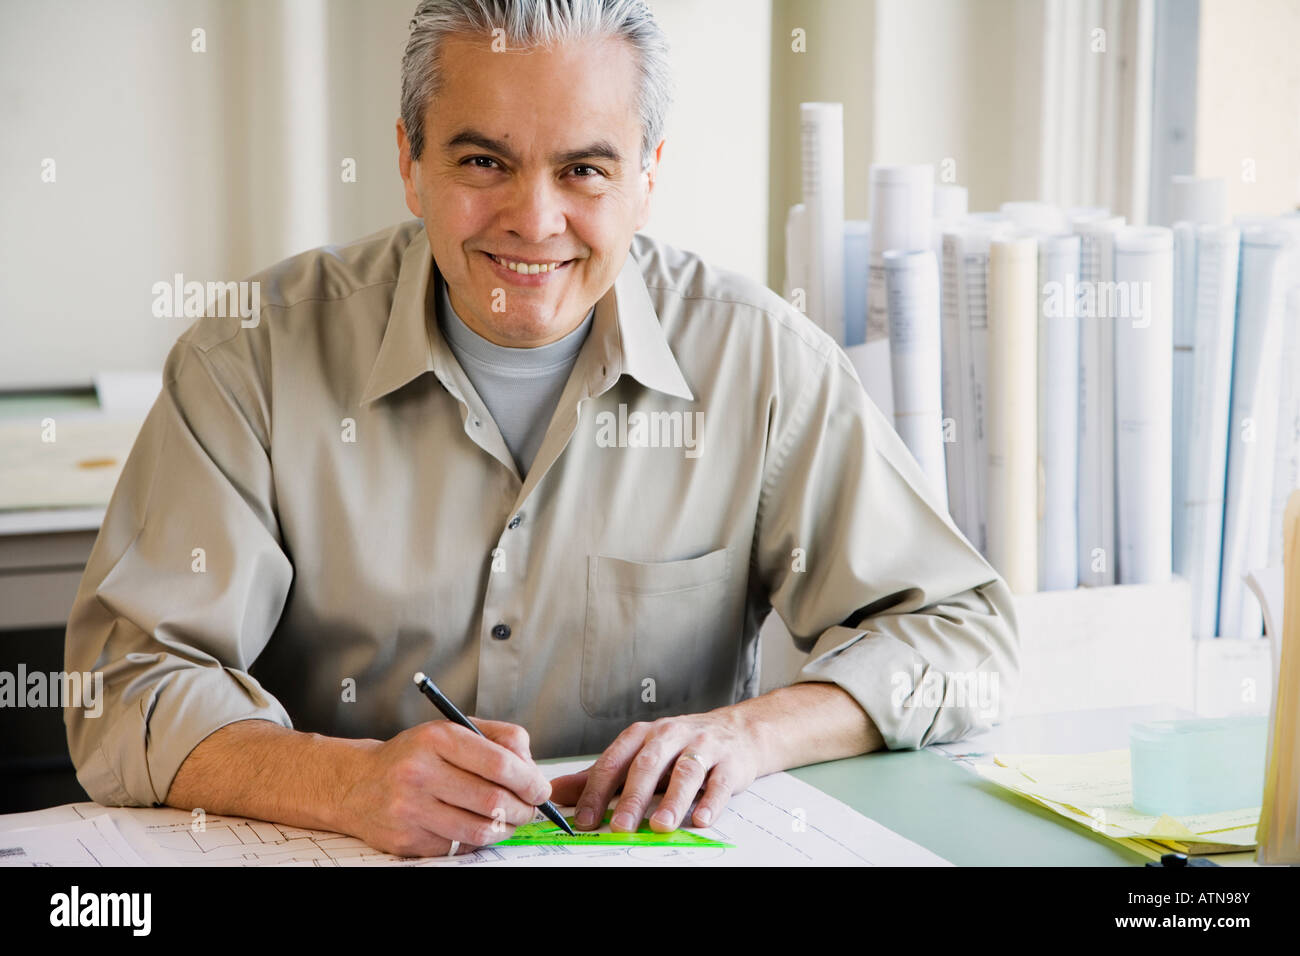 Hispanic male architect writing at desk Banque D'Images